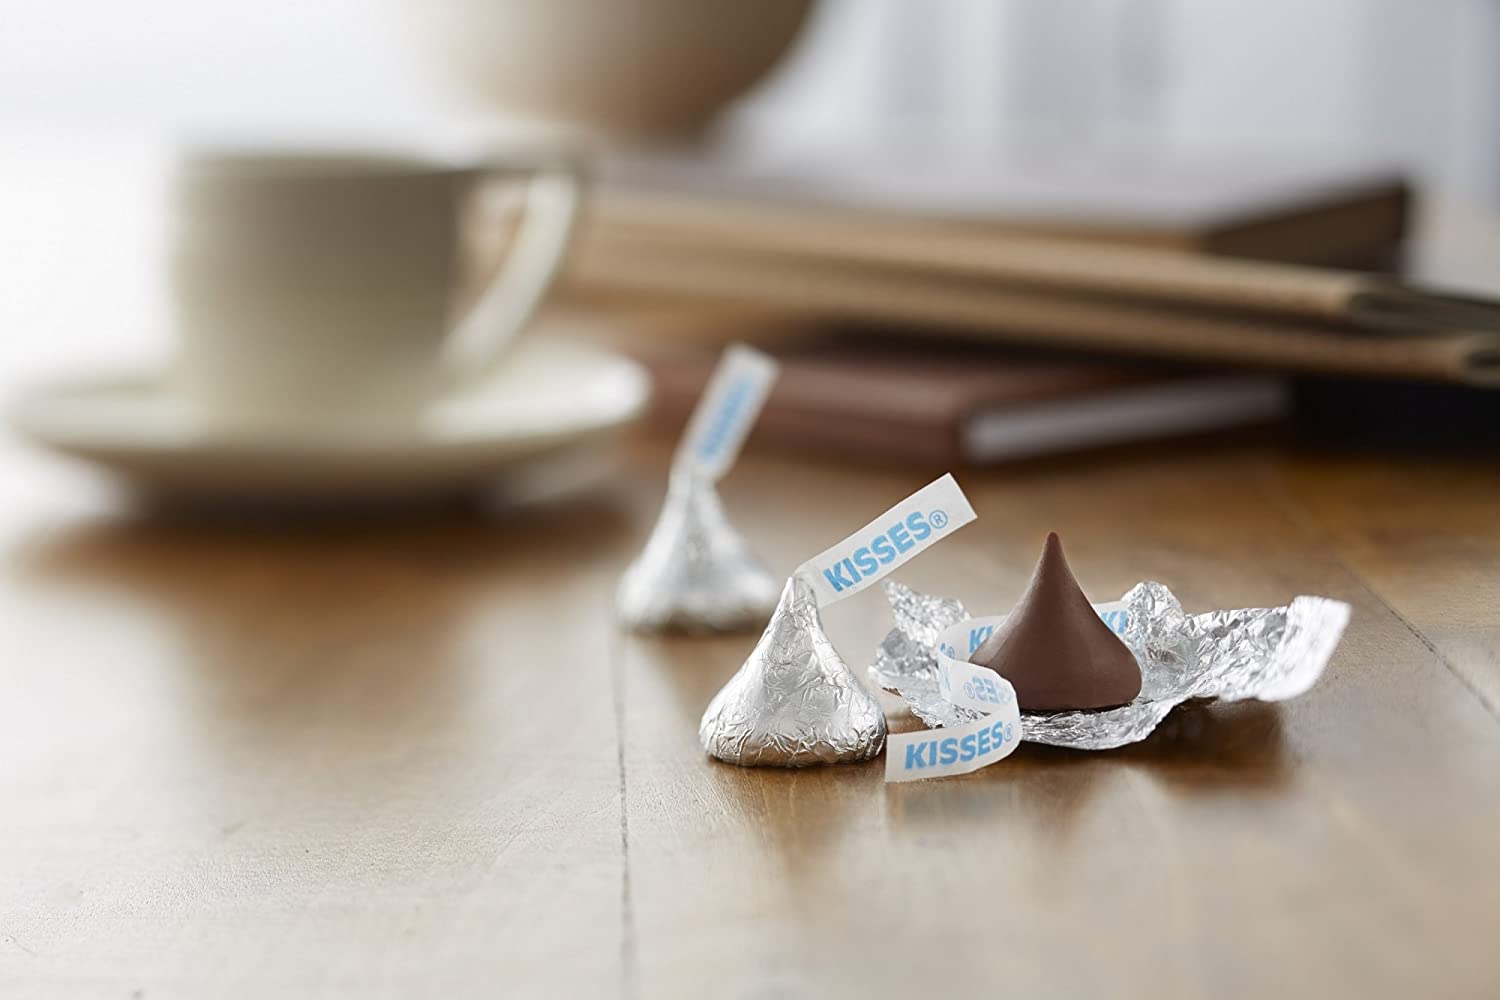 Does Hershey's chocolate Kisses have gluten?